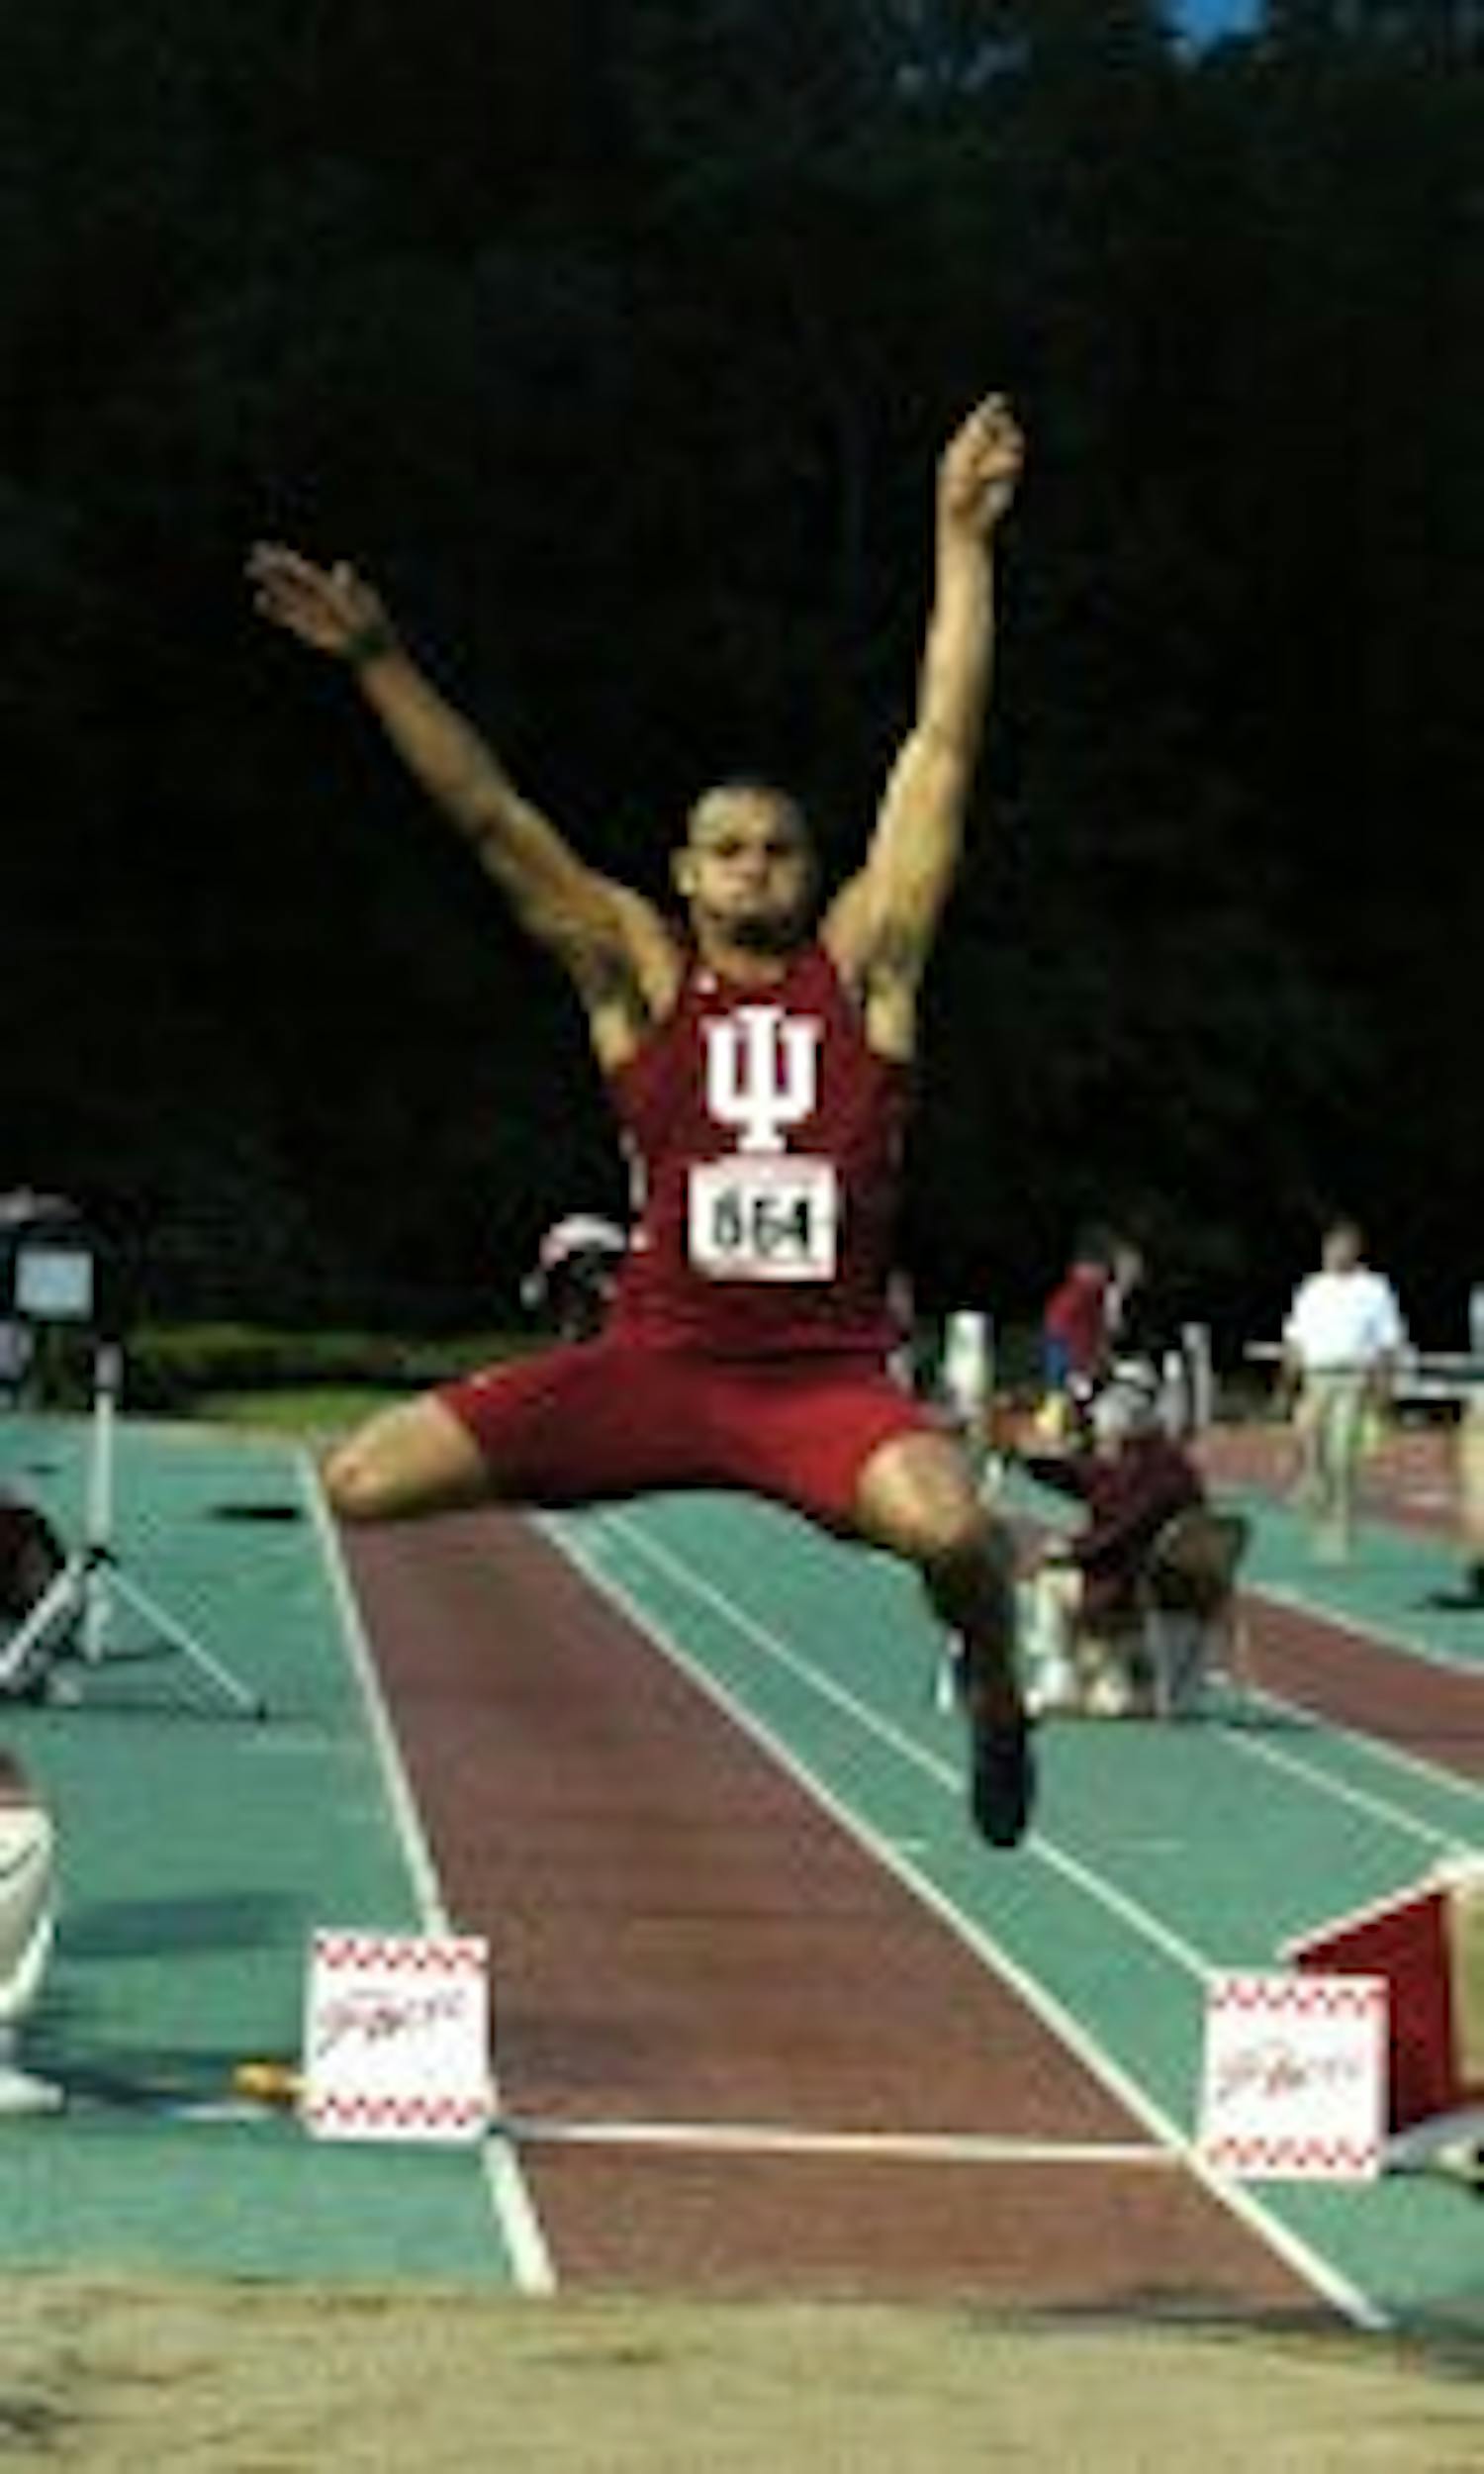 10-time Hooosier all-American Aarik Wilson finishes off a jump at the 2005 Outdoor Track and Field Championships in Sacramento, Calif., where he finished 3rd. While at IU, Wilson won an NCAA title in the Long Jump and Triple Jump during the 2005 NCAA Indoor Championships and will aim to earn a spot on the U.S. Track and Field Olympic Team this weekend.